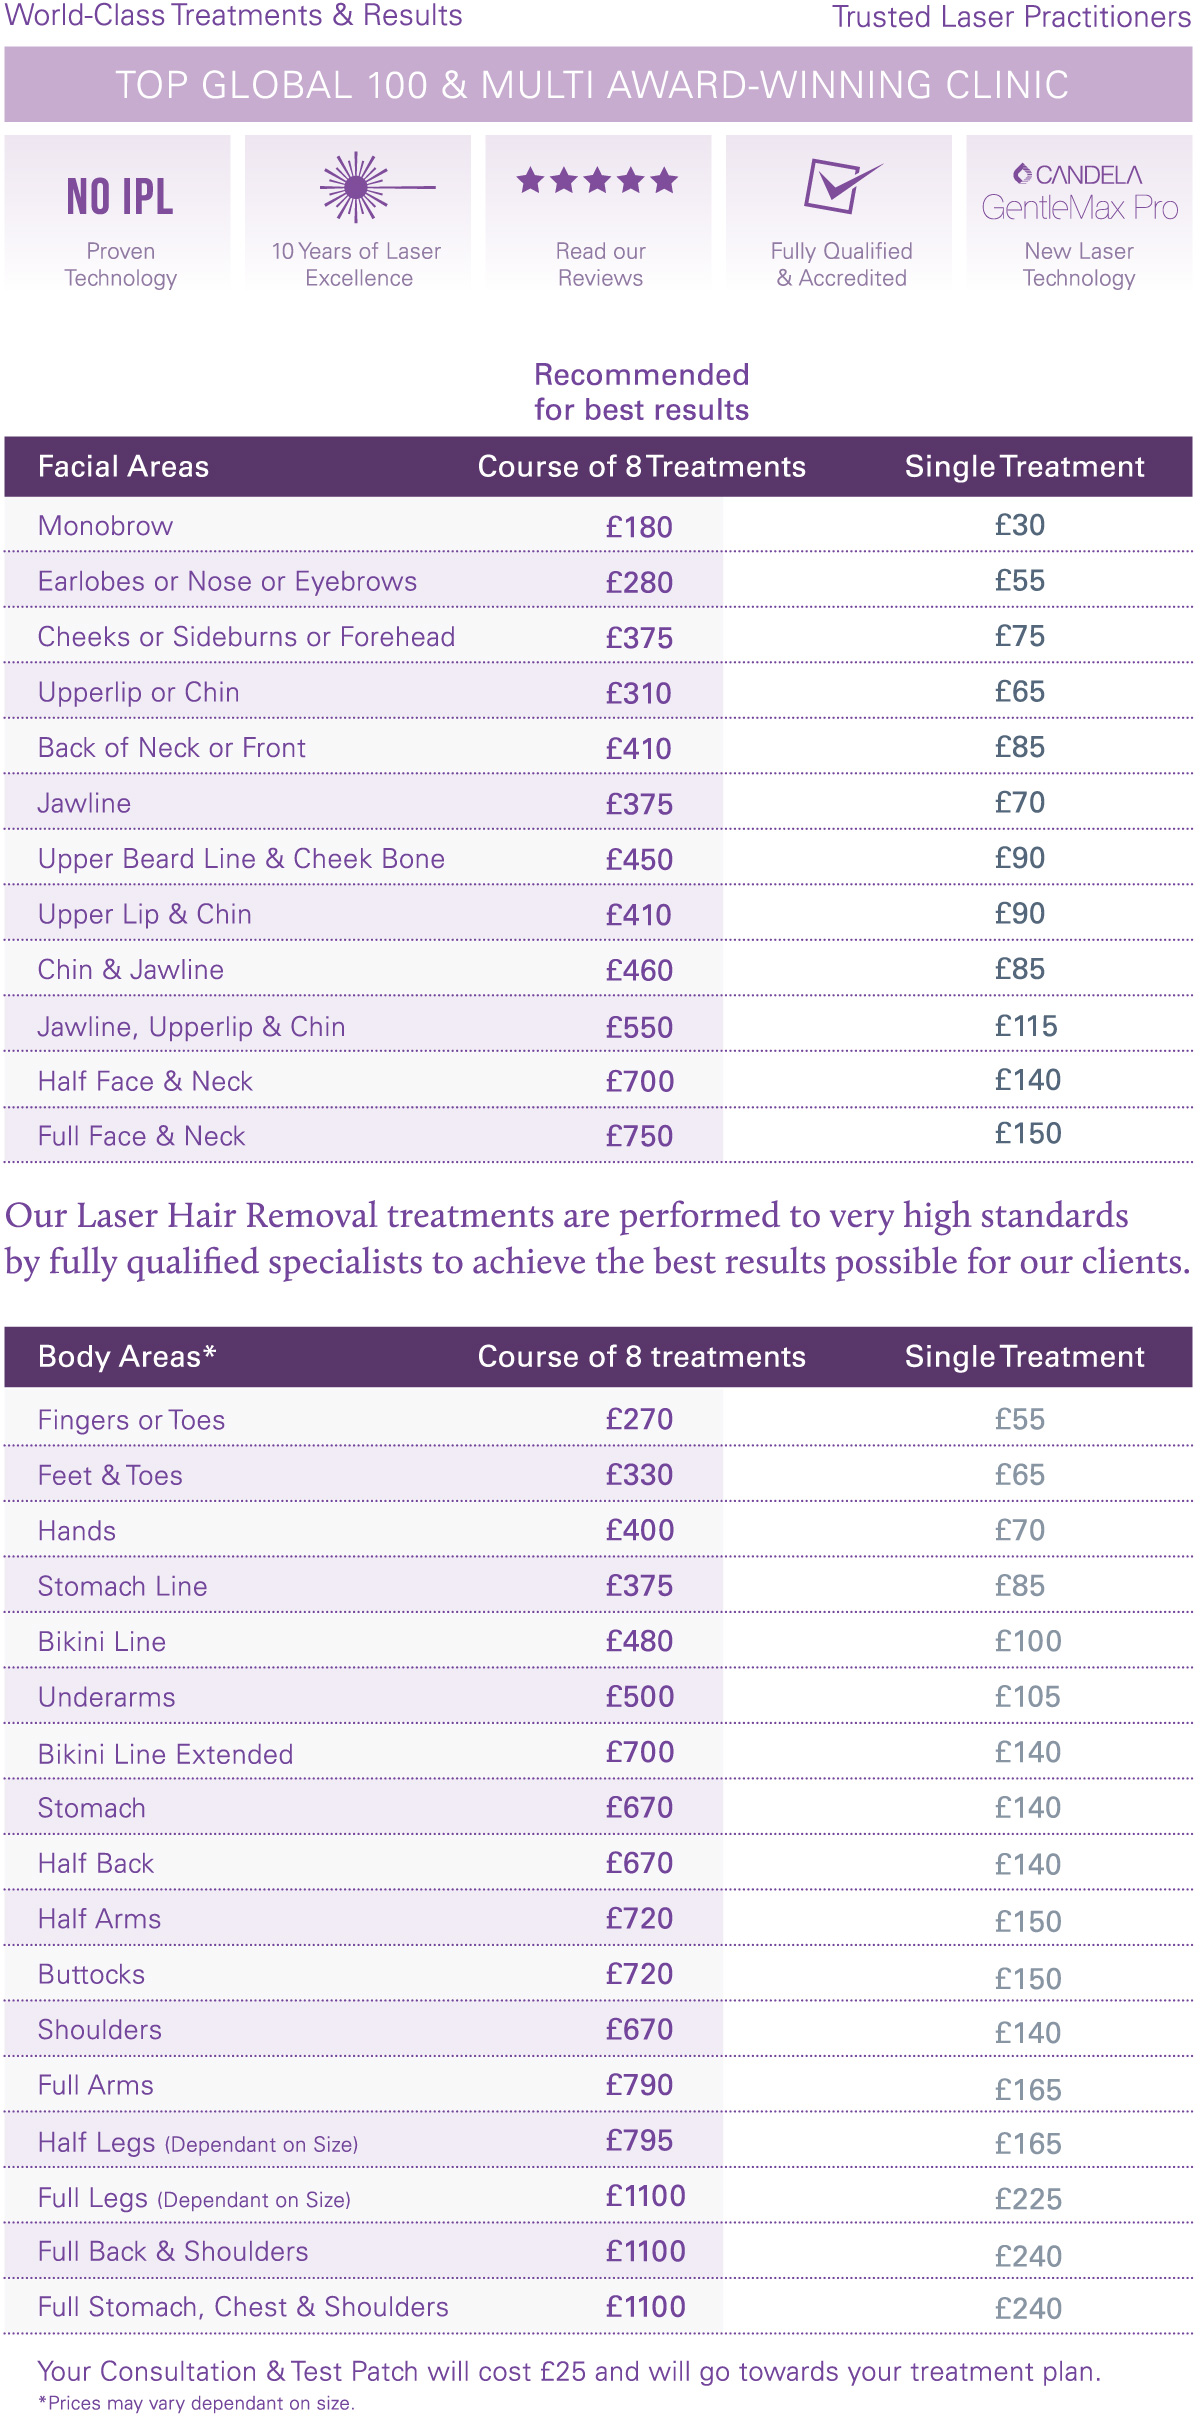 Laser Hair Removal pricing